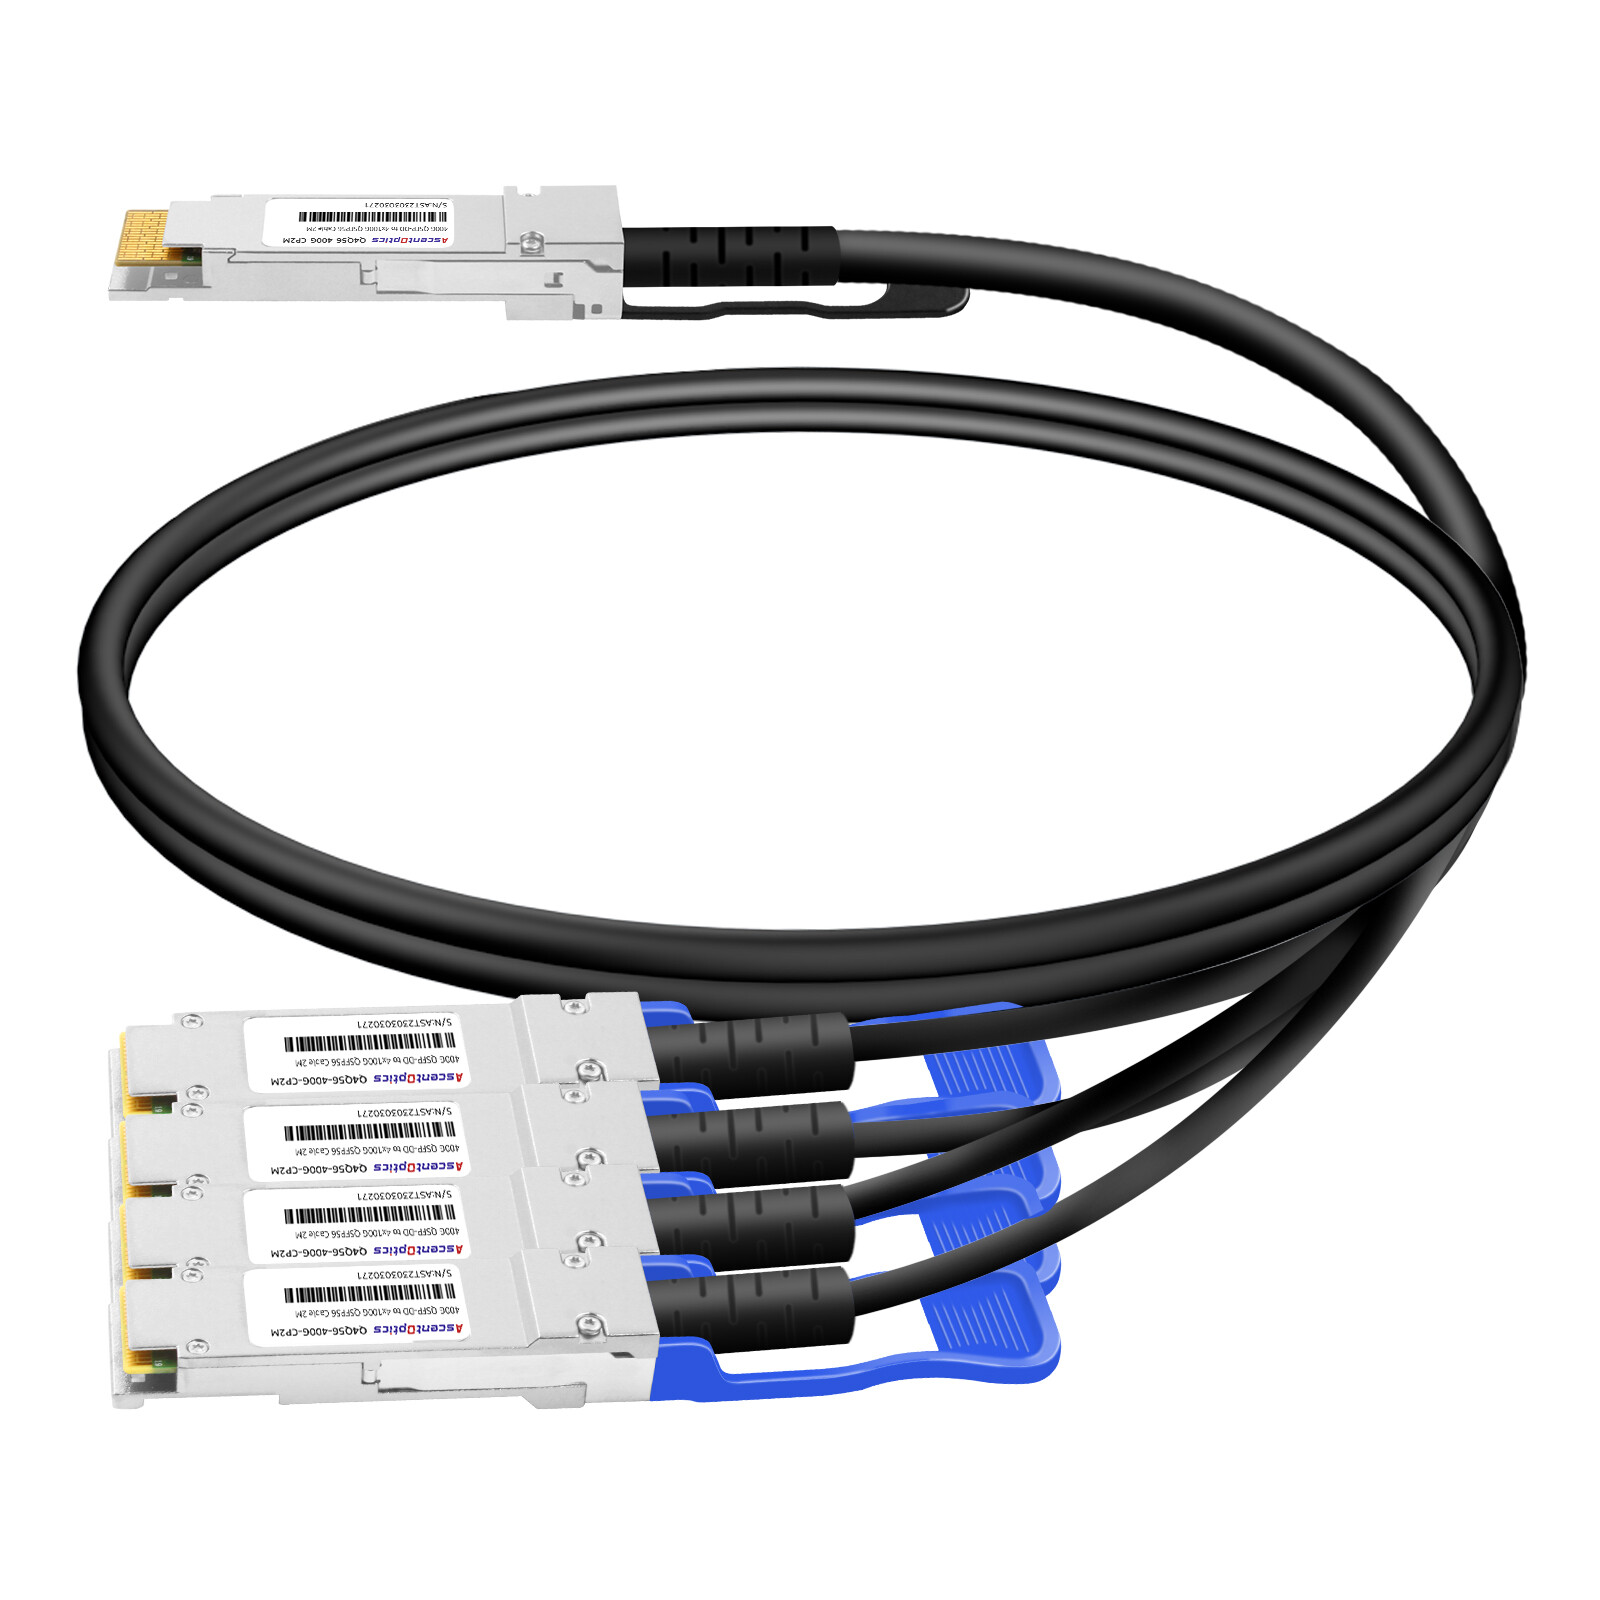 400G QSFP-DD to 4x 100G QSFP56 Copper Breakout Cable,2 Meters,Passive